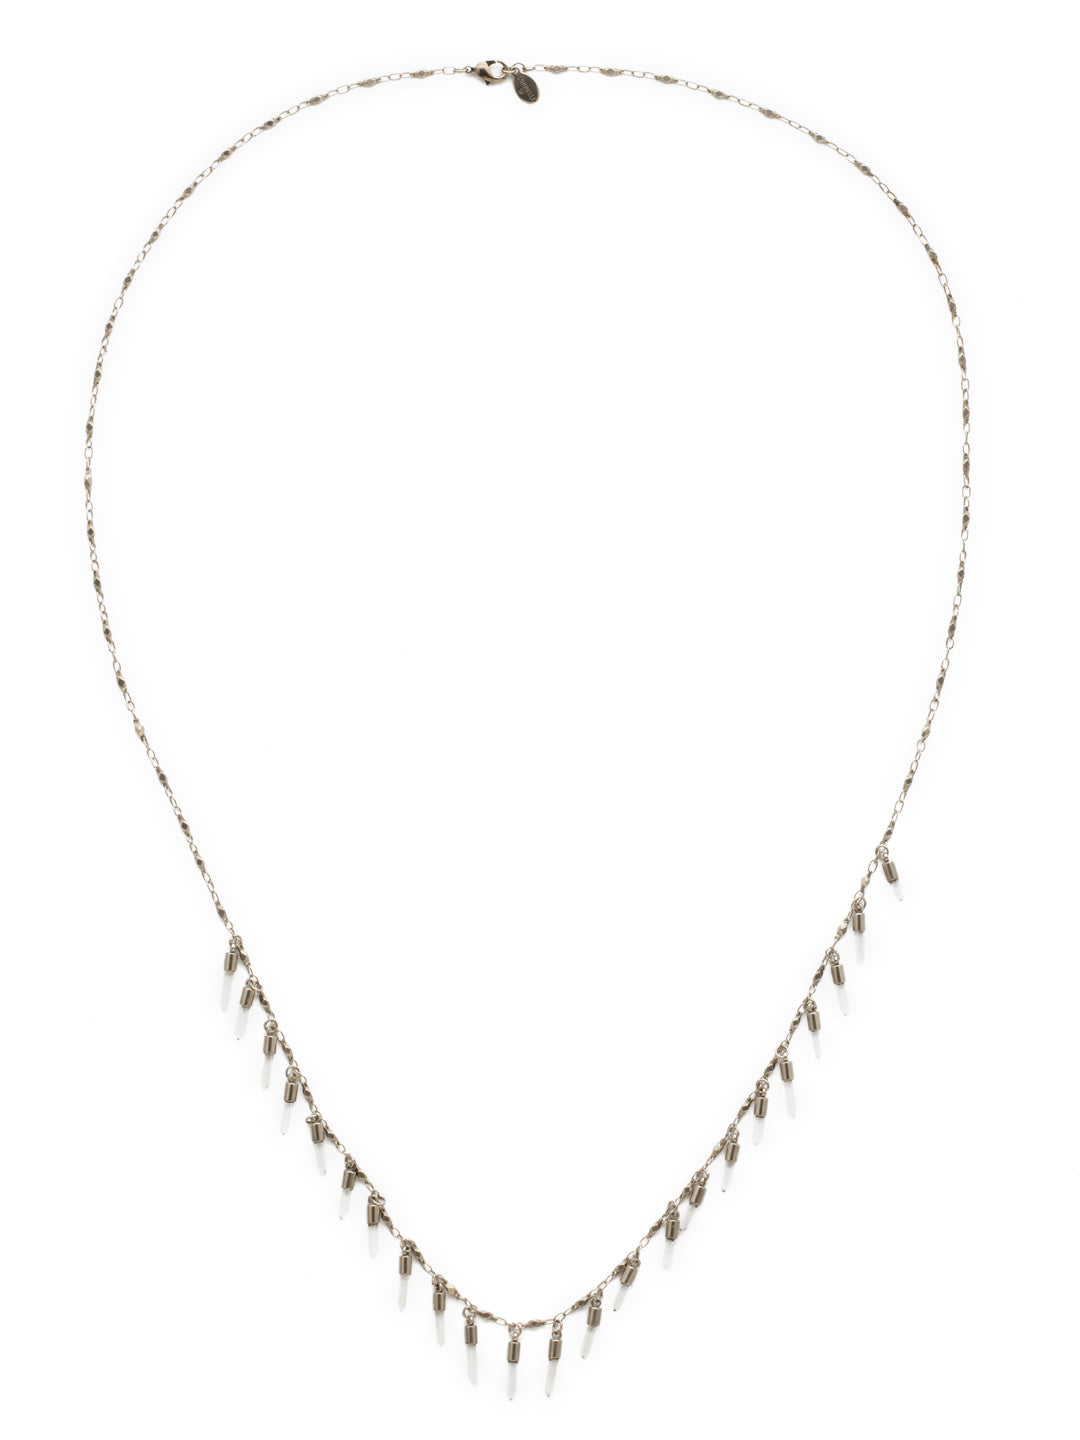 Dangling Medallions Necklace Tennis Necklace - NDW26ASCRY - A series of medallions hang from this chain making it the ideal accessory to be layered or worn alone. From Sorrelli's Crystal collection in our Antique Silver-tone finish.